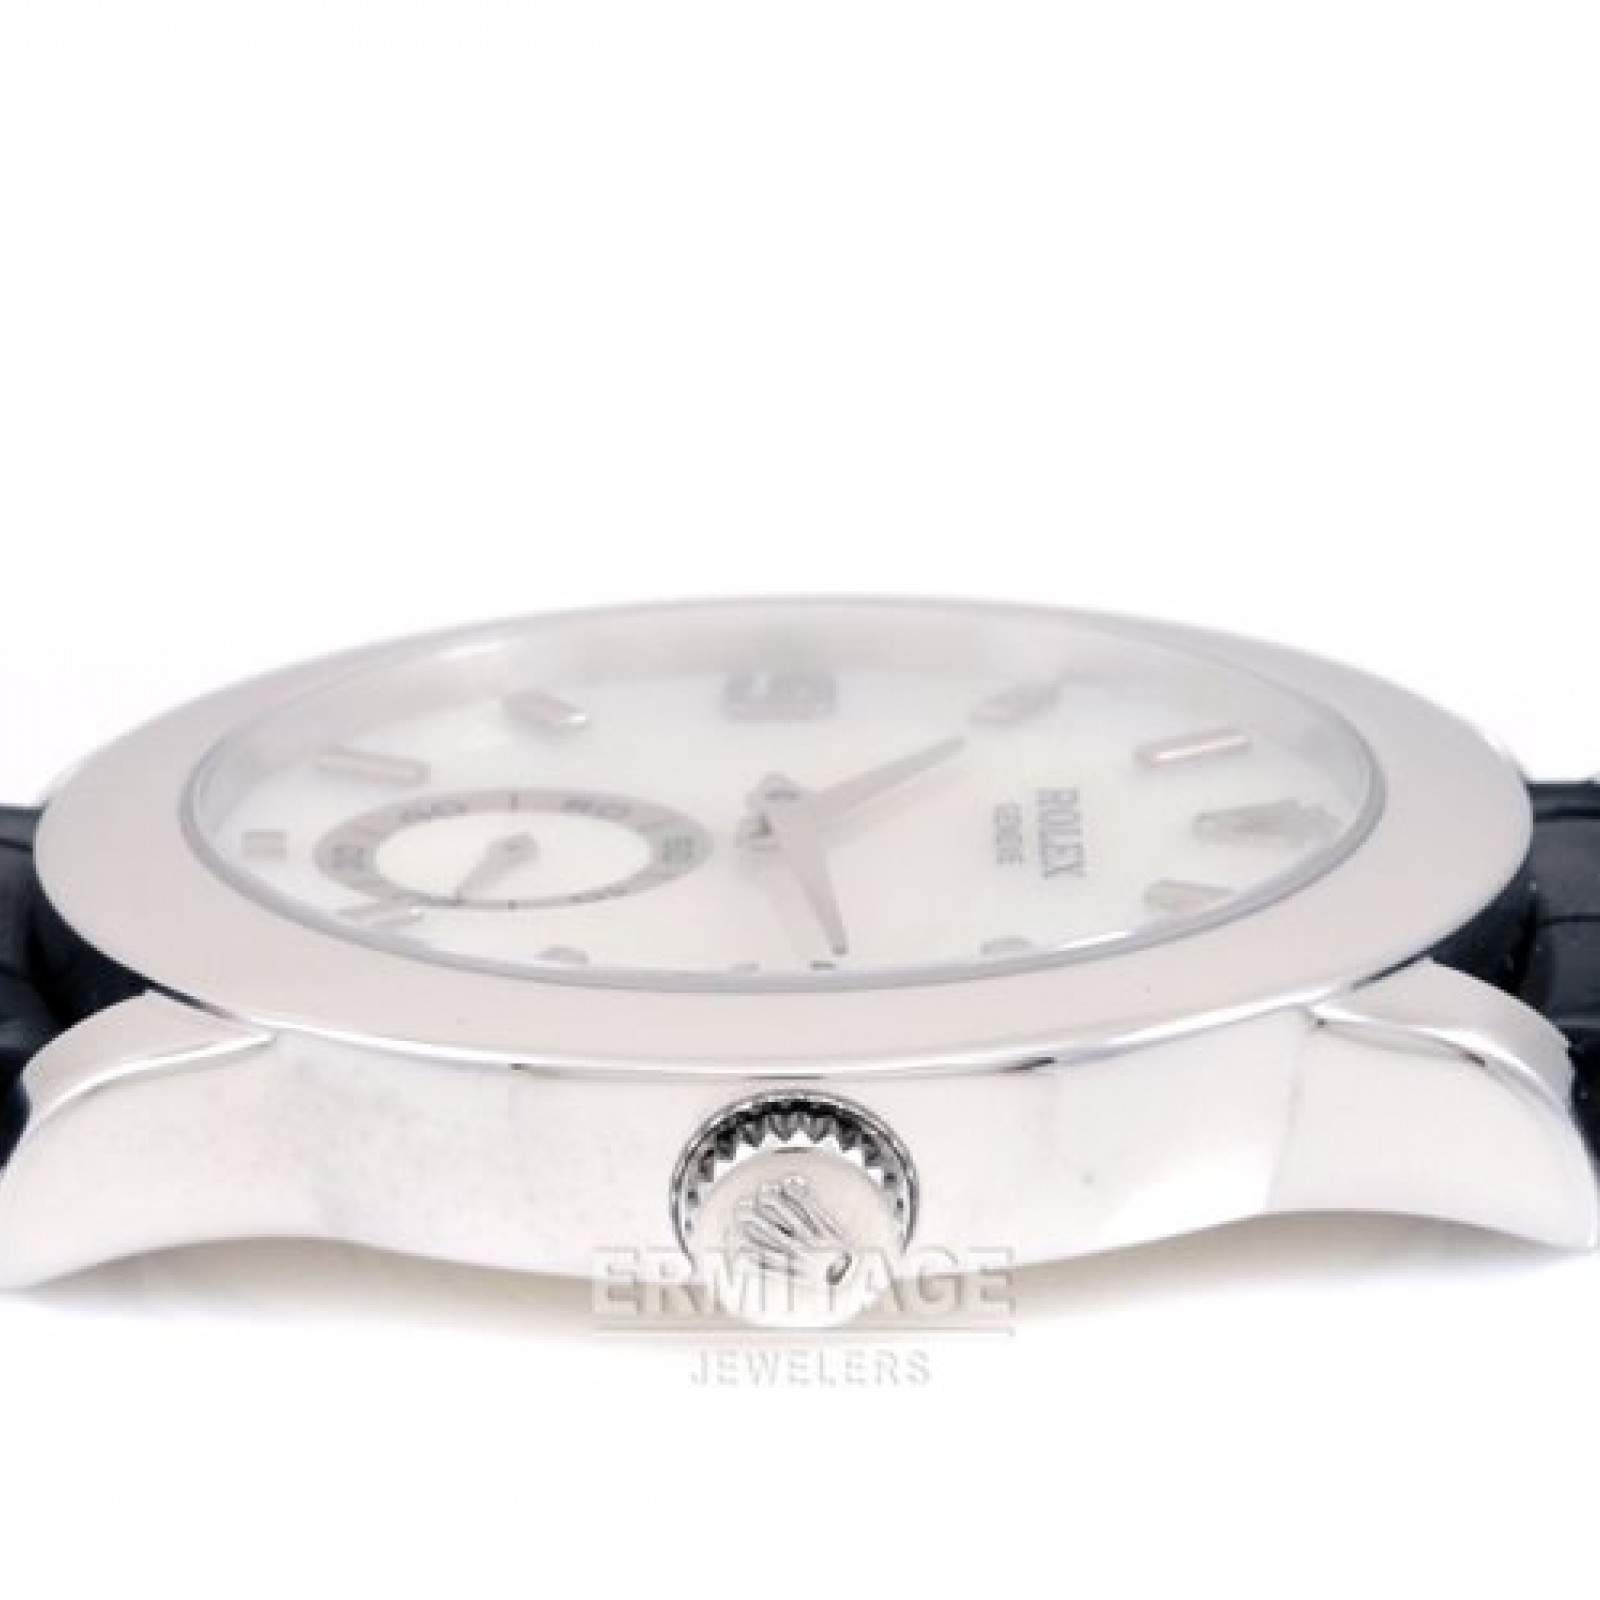 Pre-Owned Rolex Cellini 5240 with White Mother Of Pearl Dial